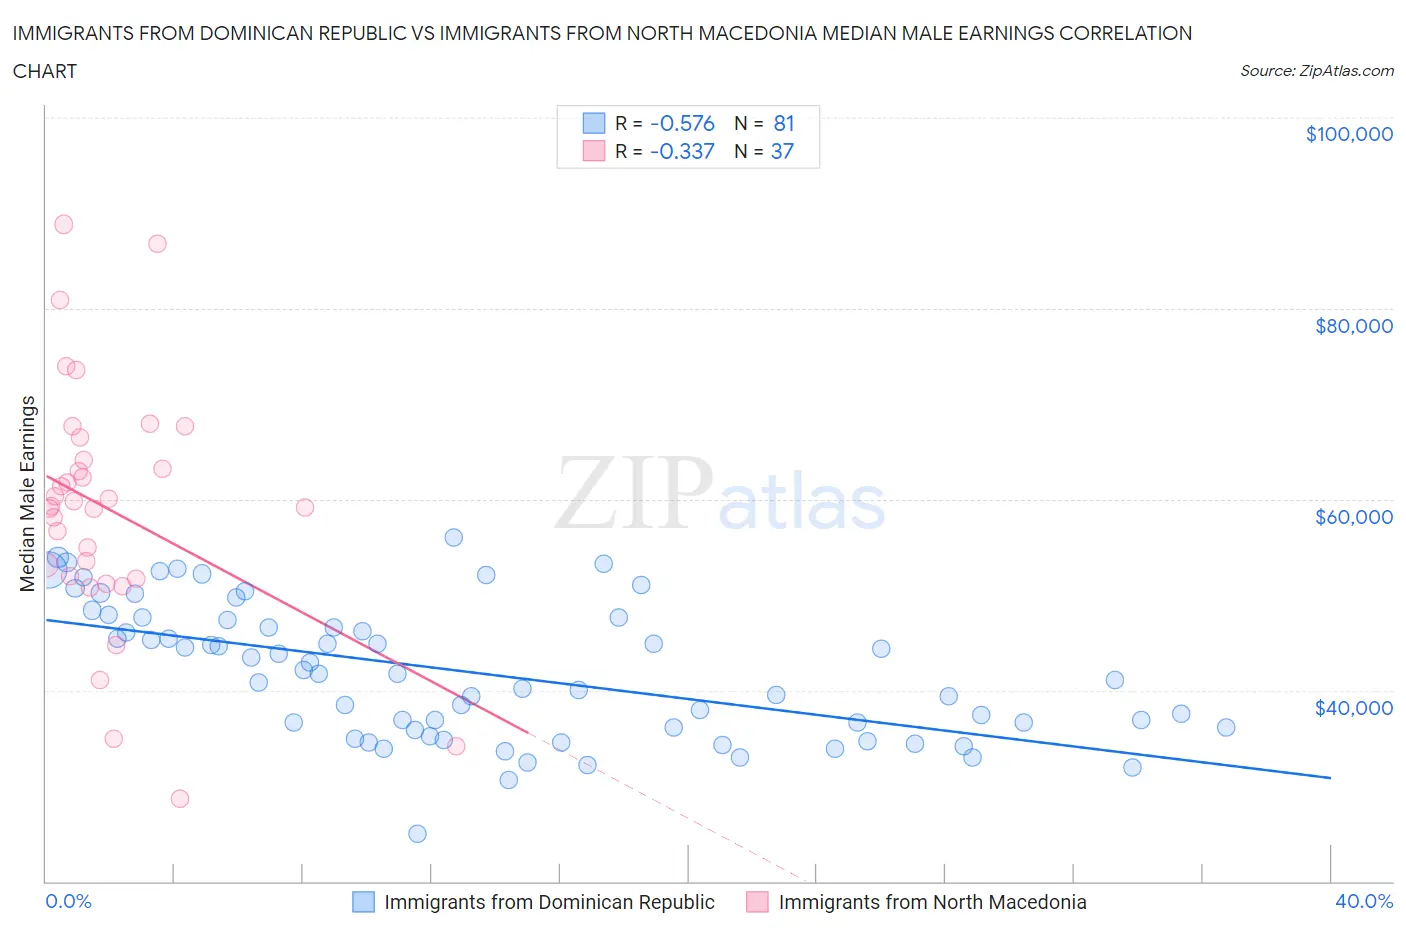 Immigrants from Dominican Republic vs Immigrants from North Macedonia Median Male Earnings